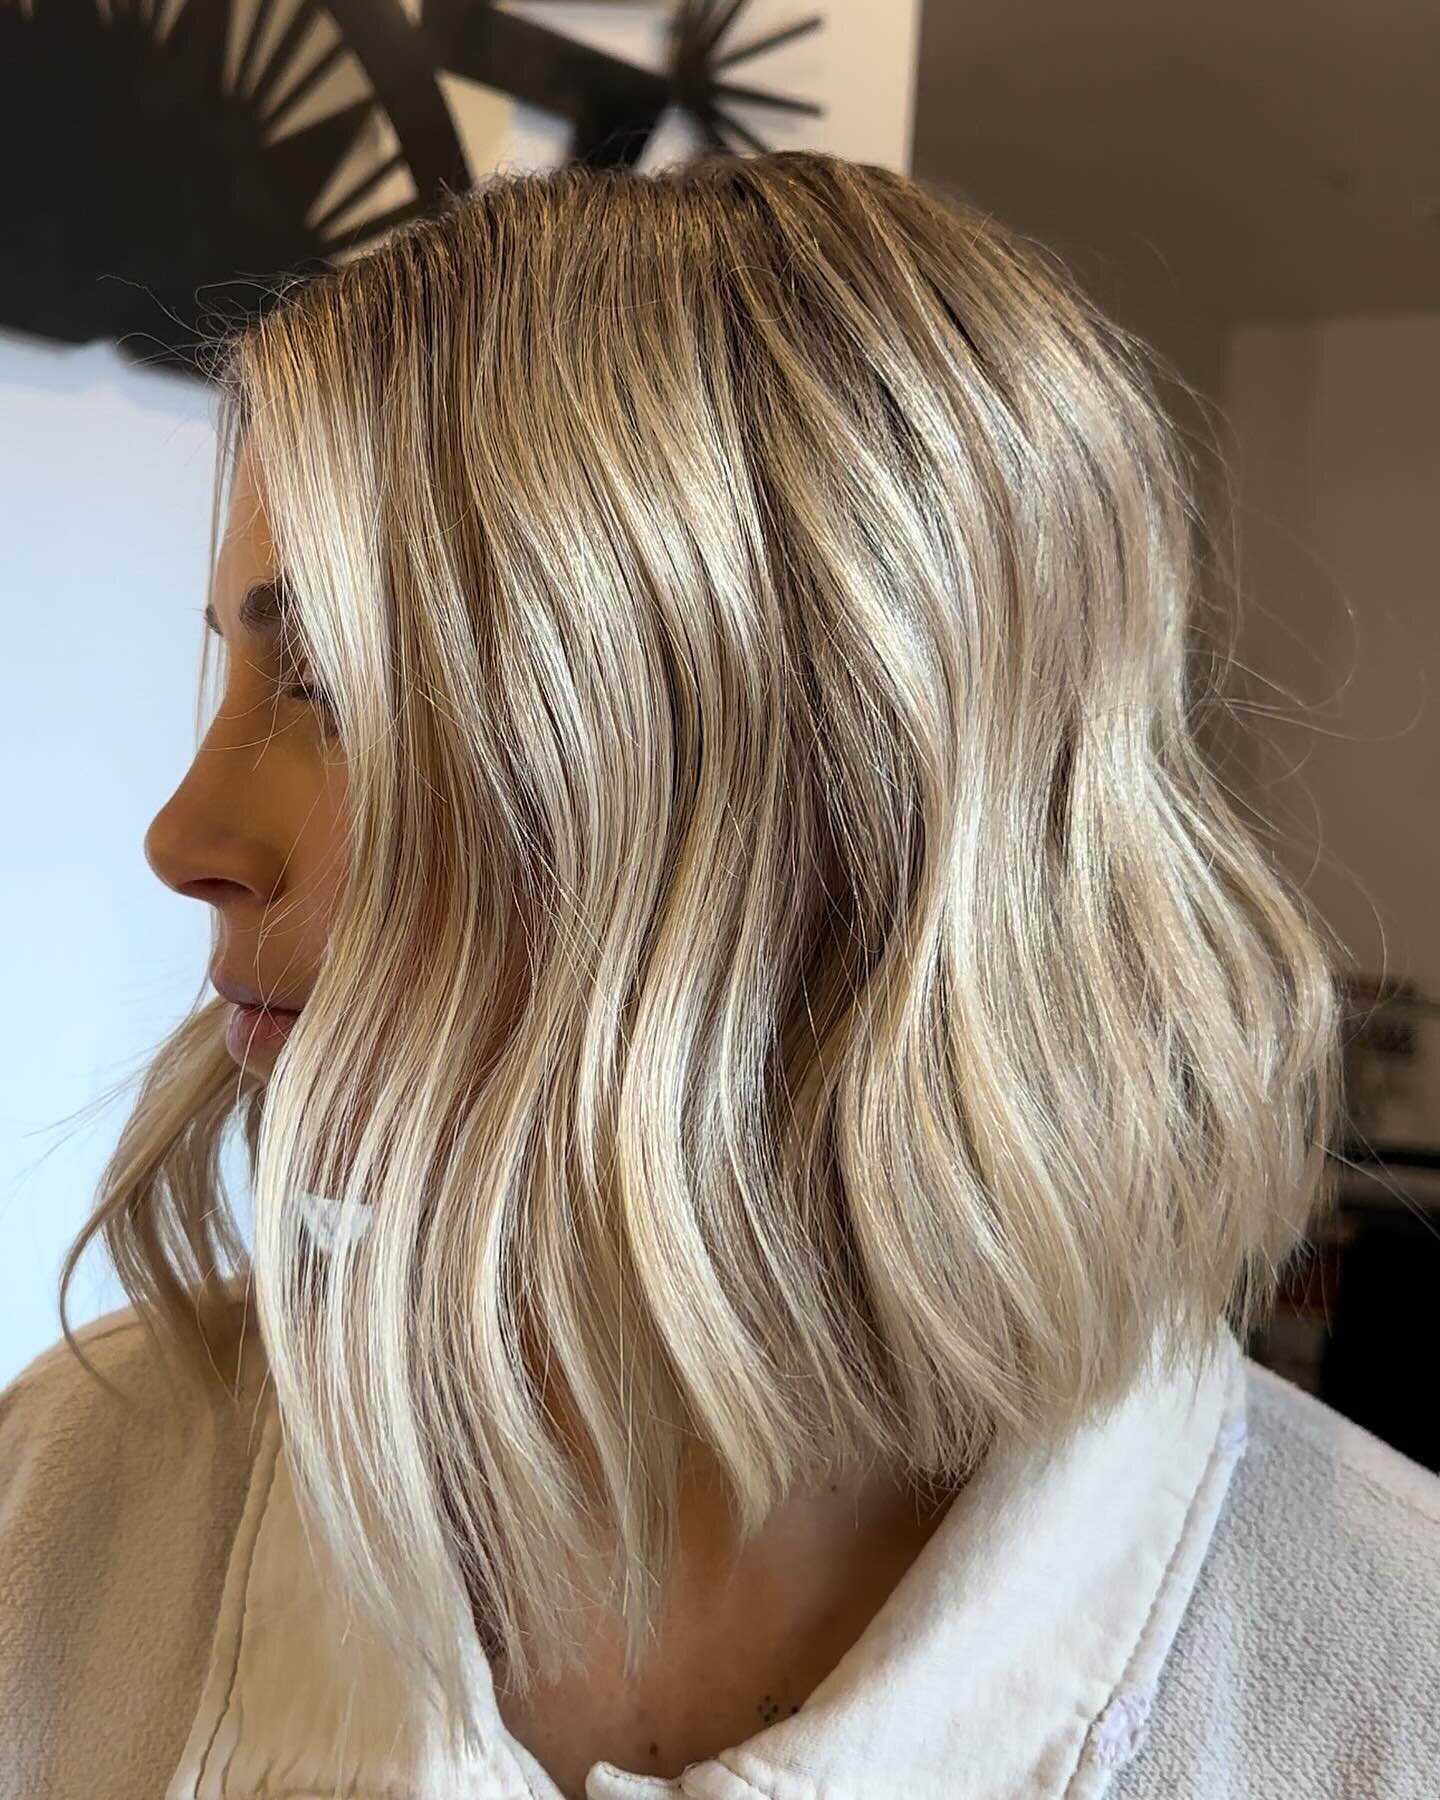 Appointments are open through April in #carbondalecolorado &bull; all booking is done online. Book online at ashandgold.com, link in bio.
&bull;
&bull;
&bull;
#blonde #blondebalayage #bob #hair #aspen #aspensnowmass #colorado #carbondale #dysonhair #